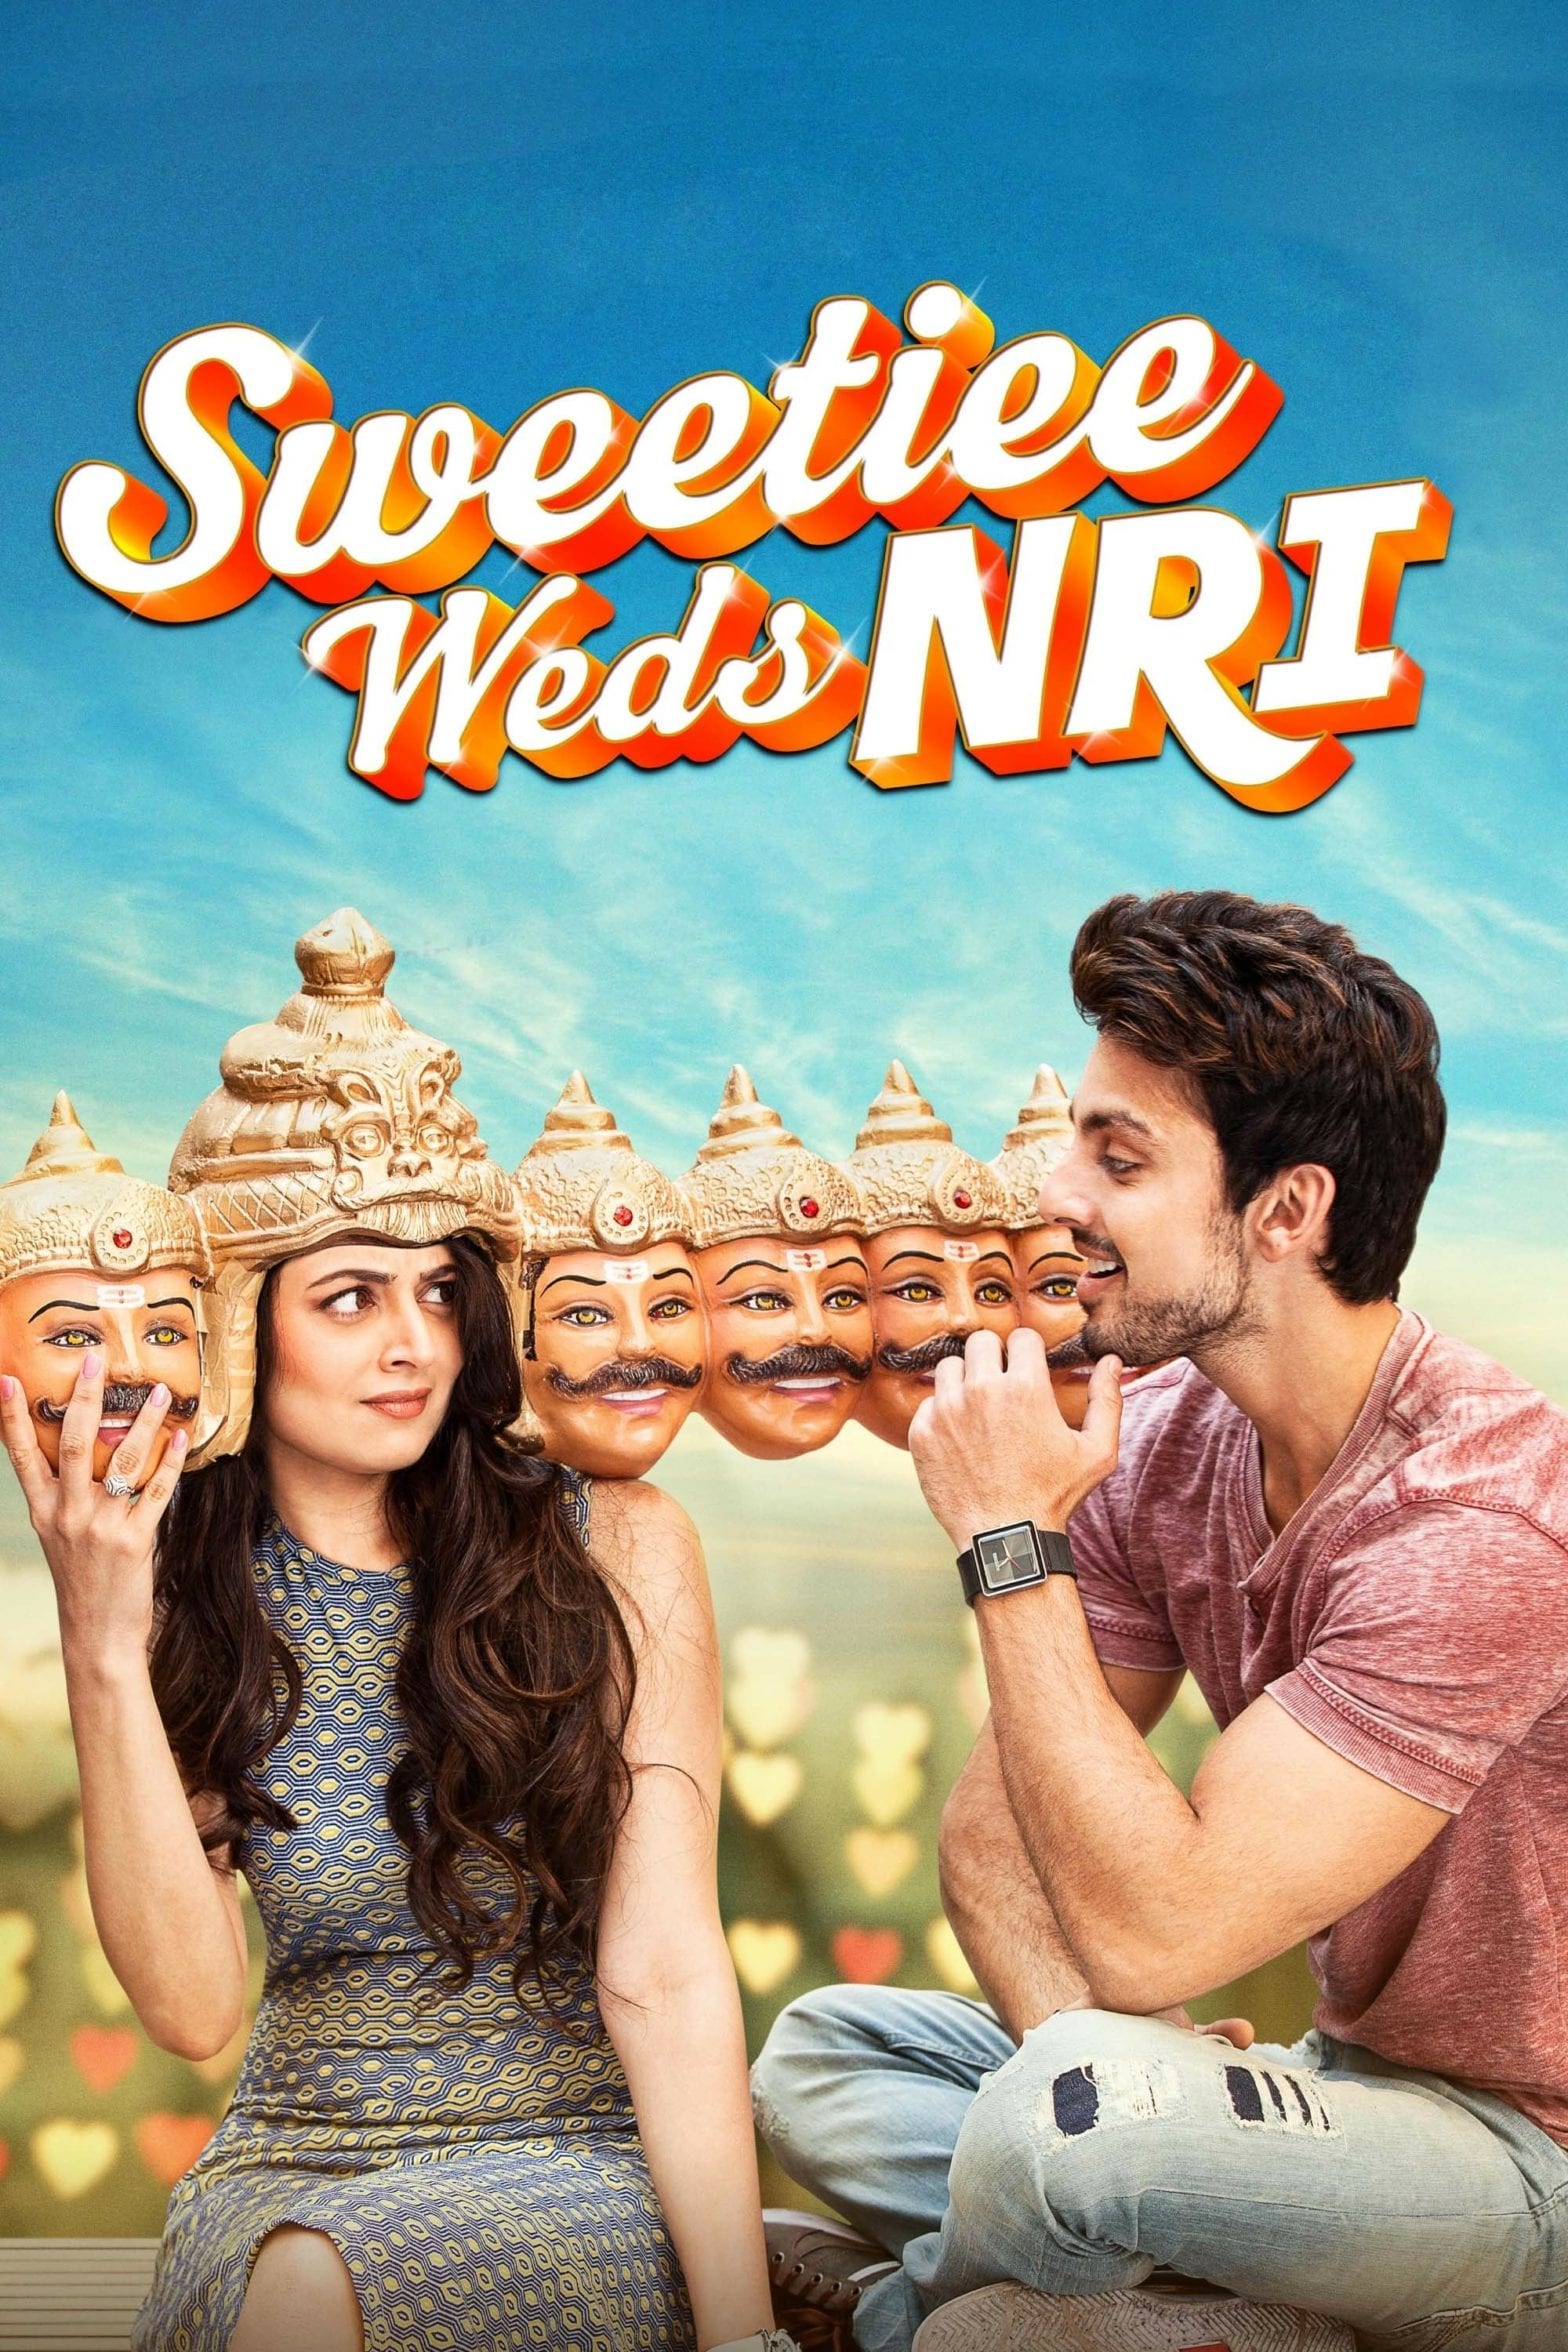 Poster for the movie "Sweetiee Weds NRI"